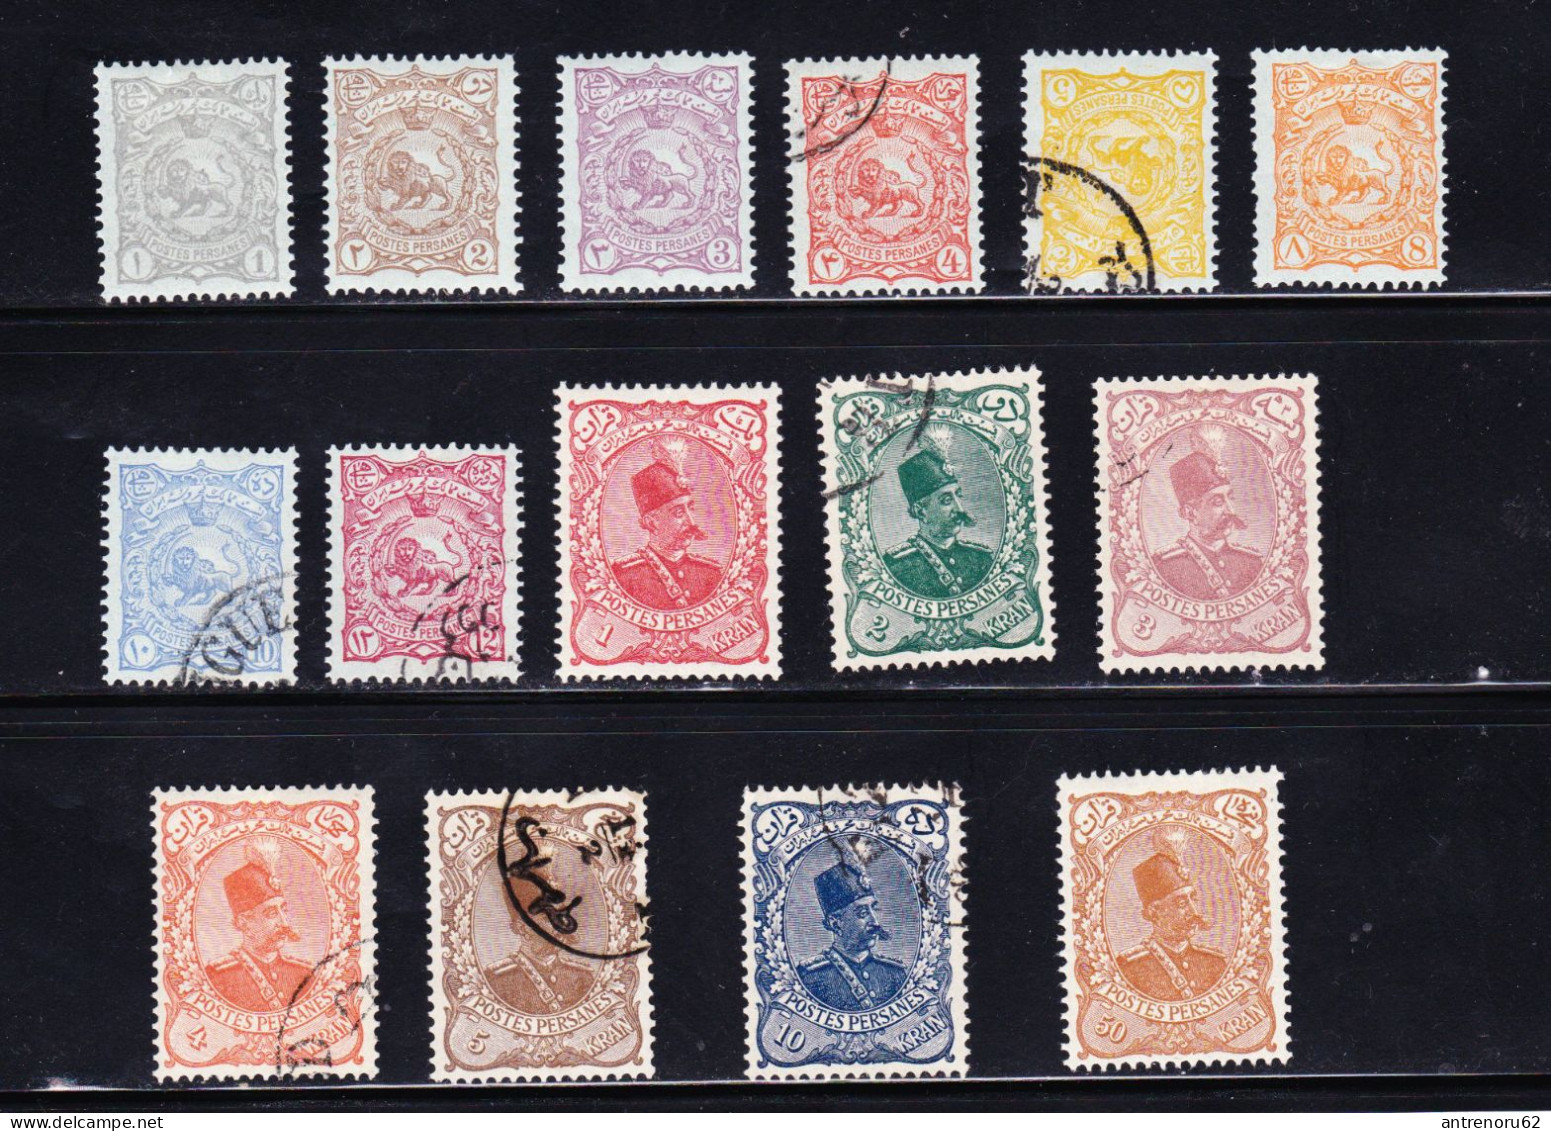 STAMPS-IRAN-1899-UNUSED-MH*-USED-SEE-SCAN - Iran